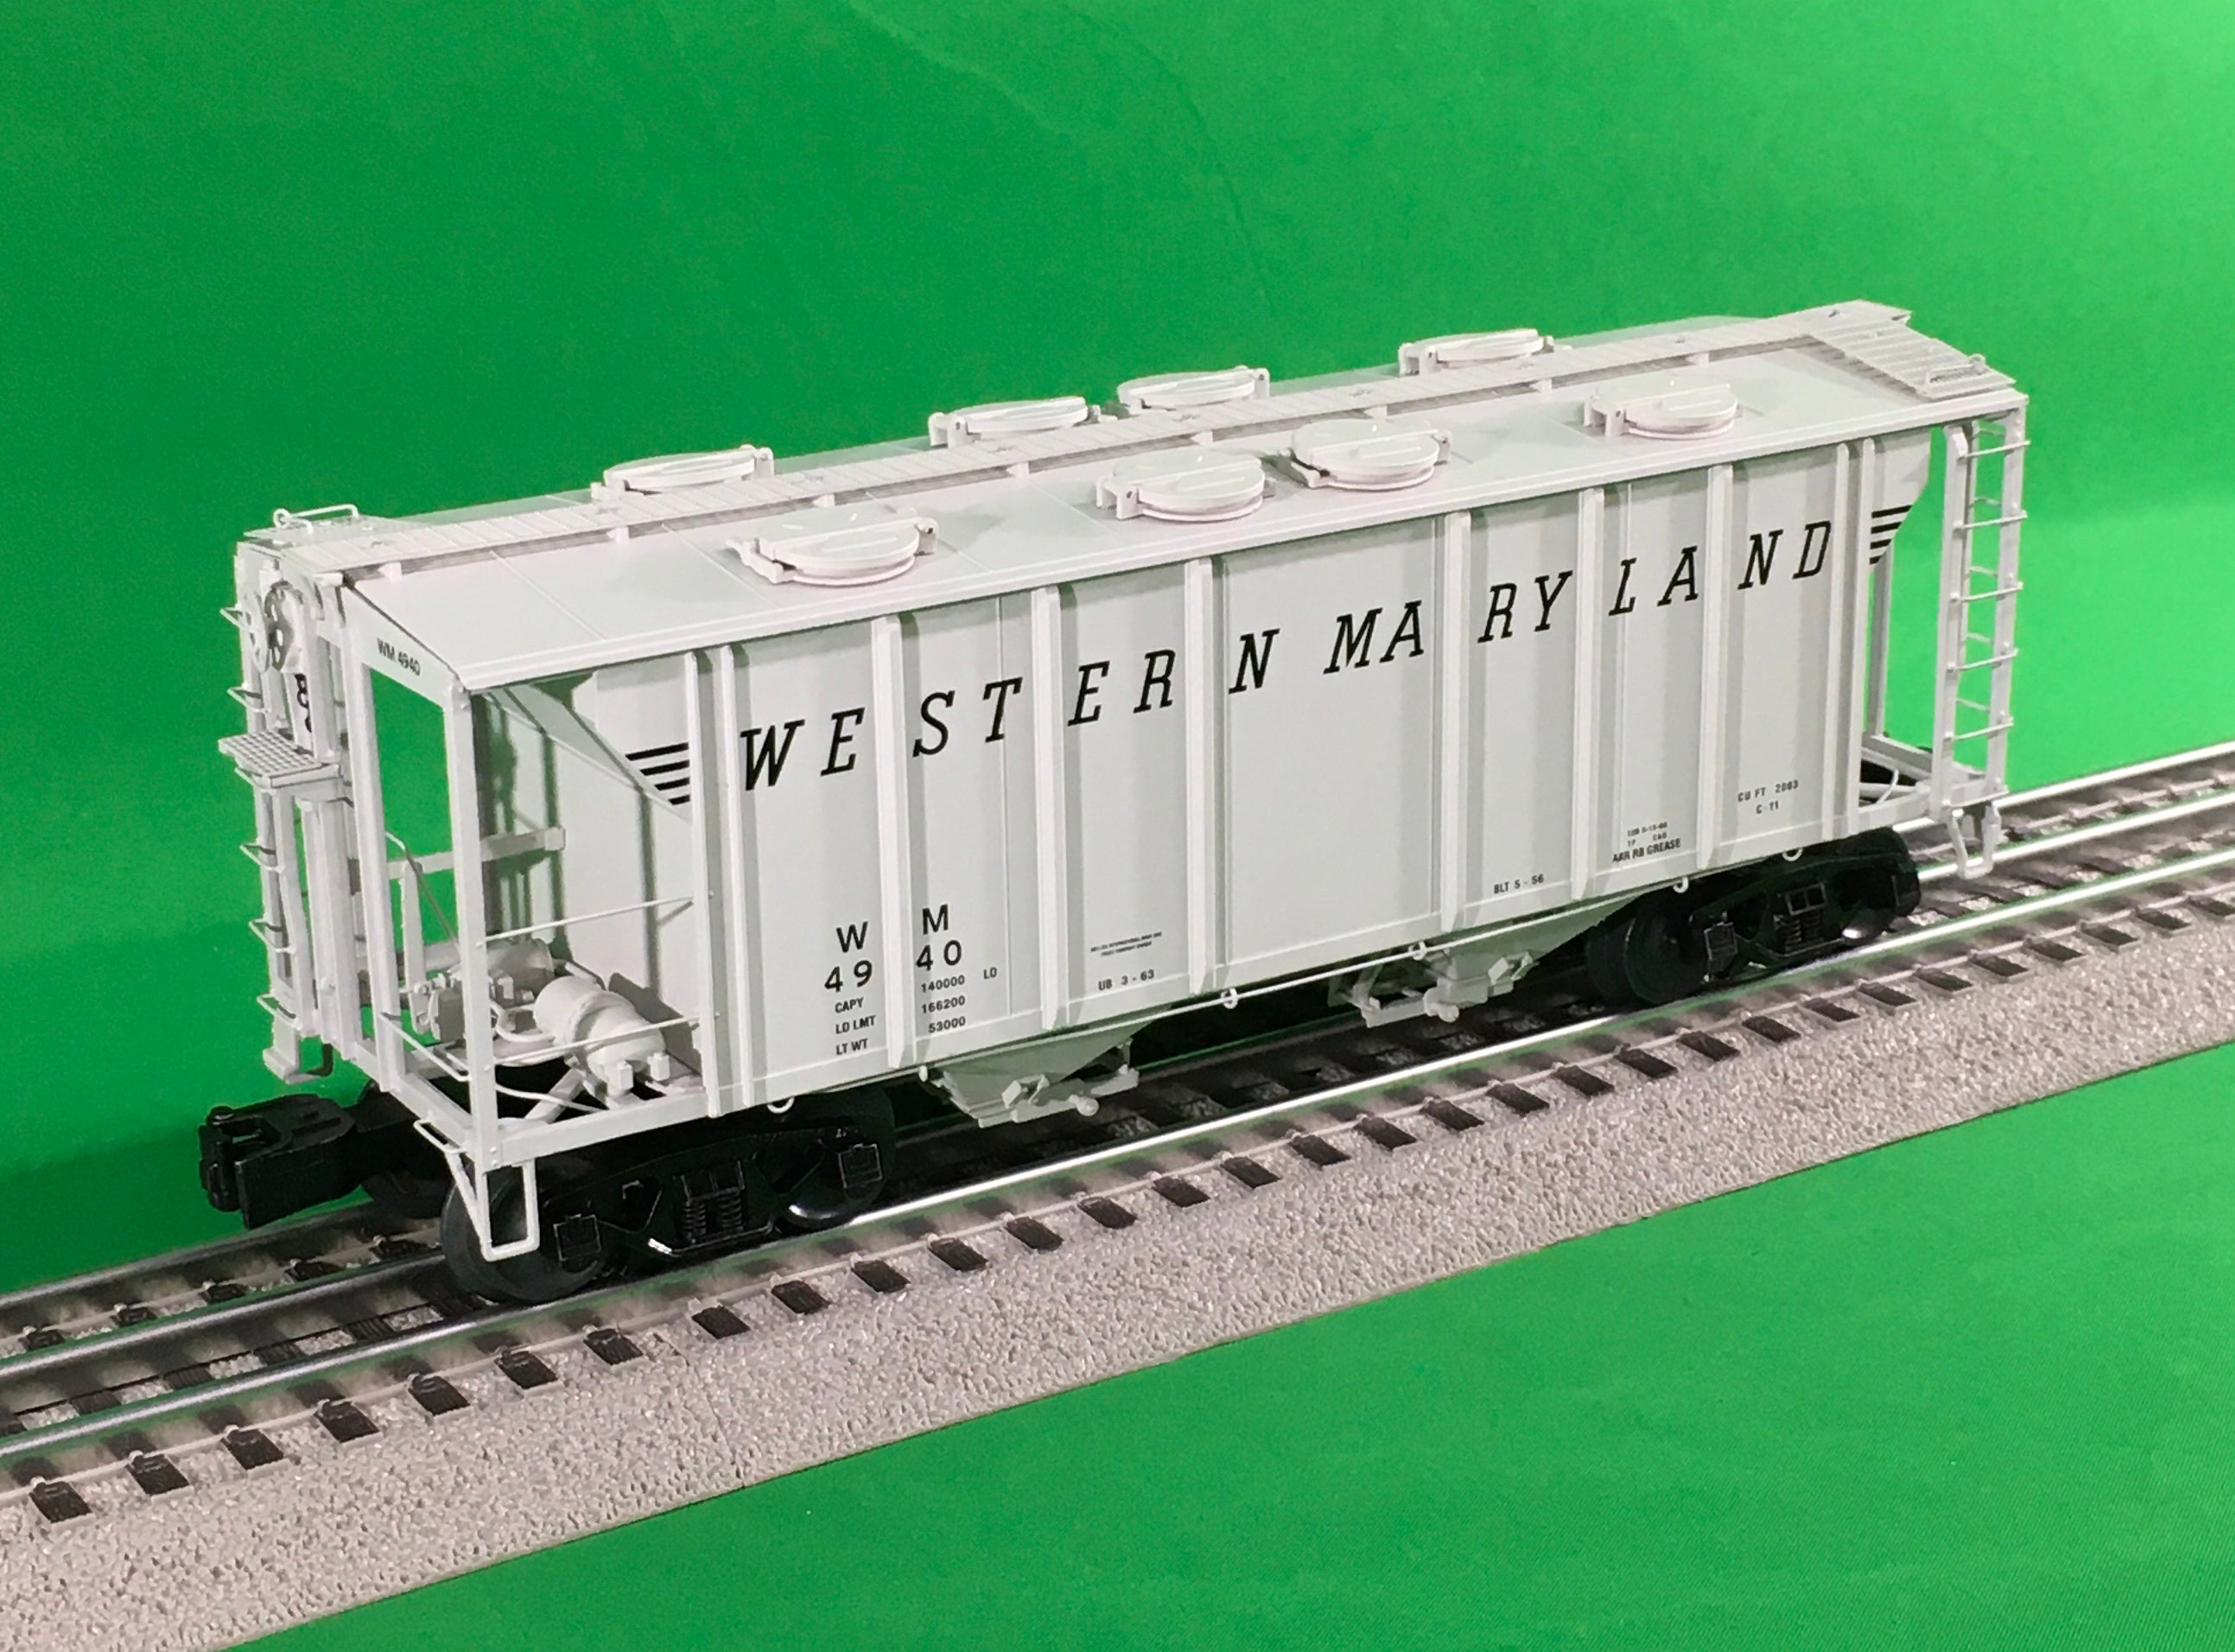 Lionel 2126230 - PS-2 Hoppers "Western Maryland" #4940